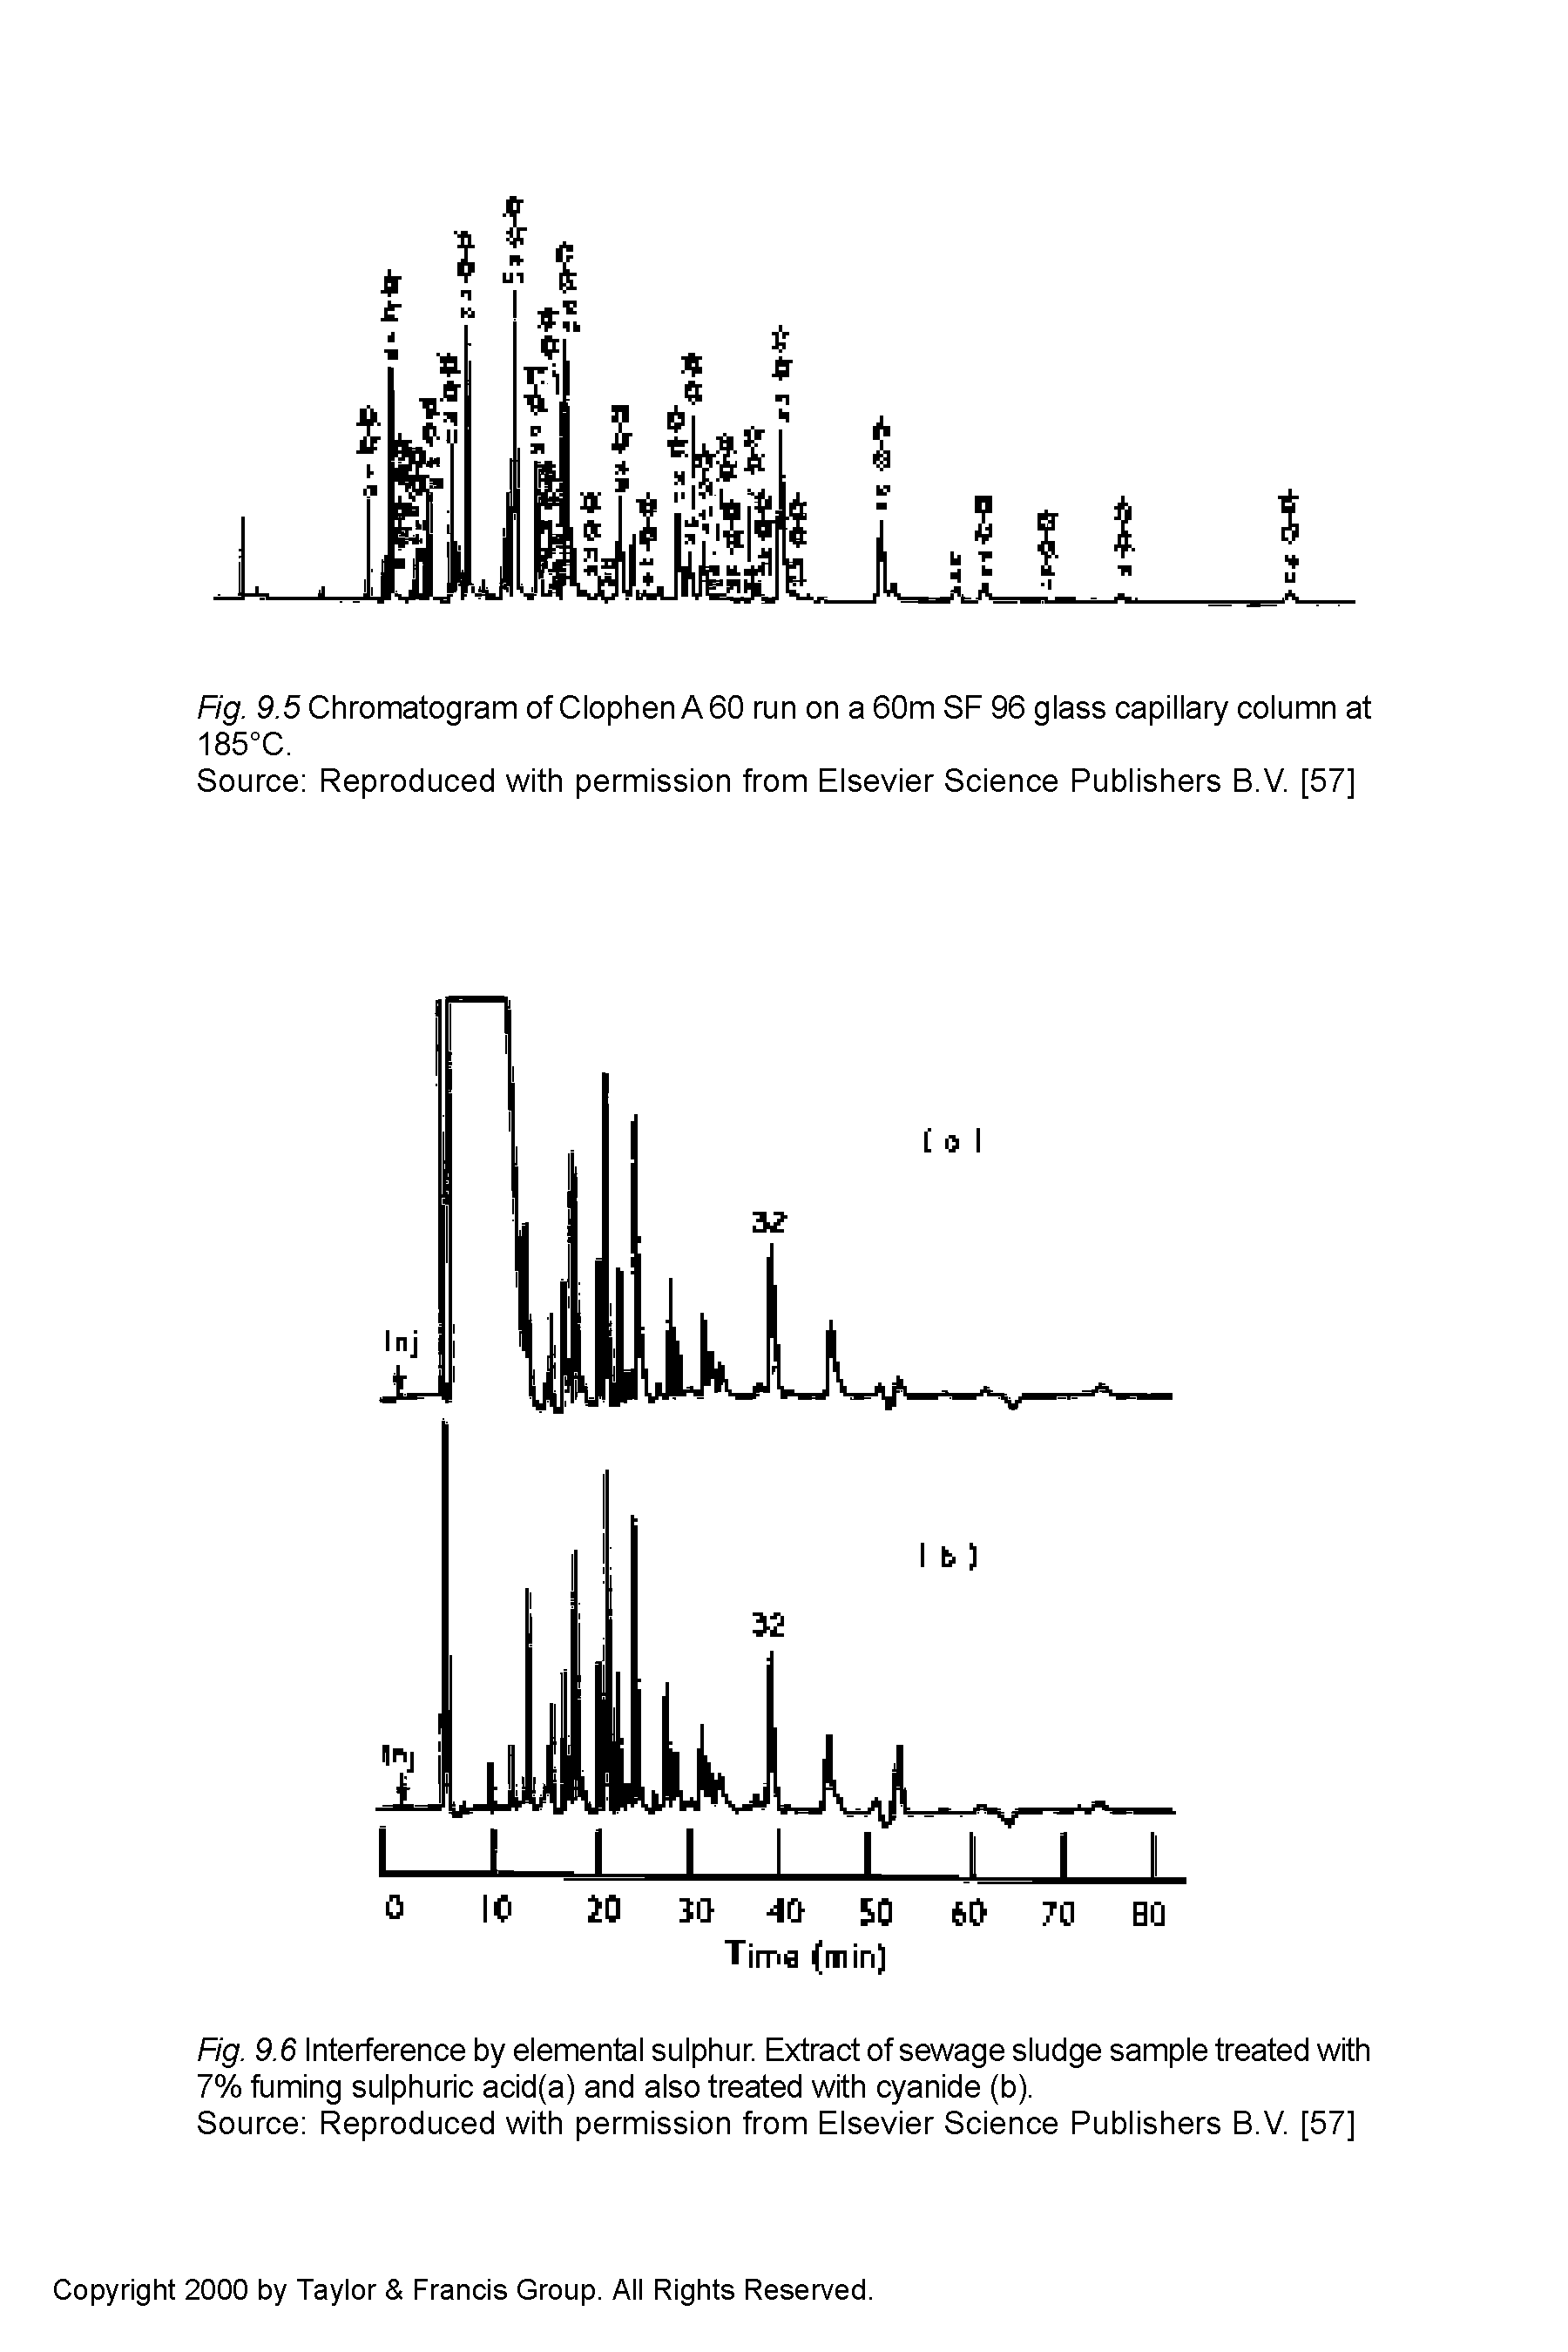 Fig. 9.6 Interference by elemental sulphur. Extract of sewage sludge sample treated with 7% fuming sulphuric acid(a) and also treated with cyanide (b).